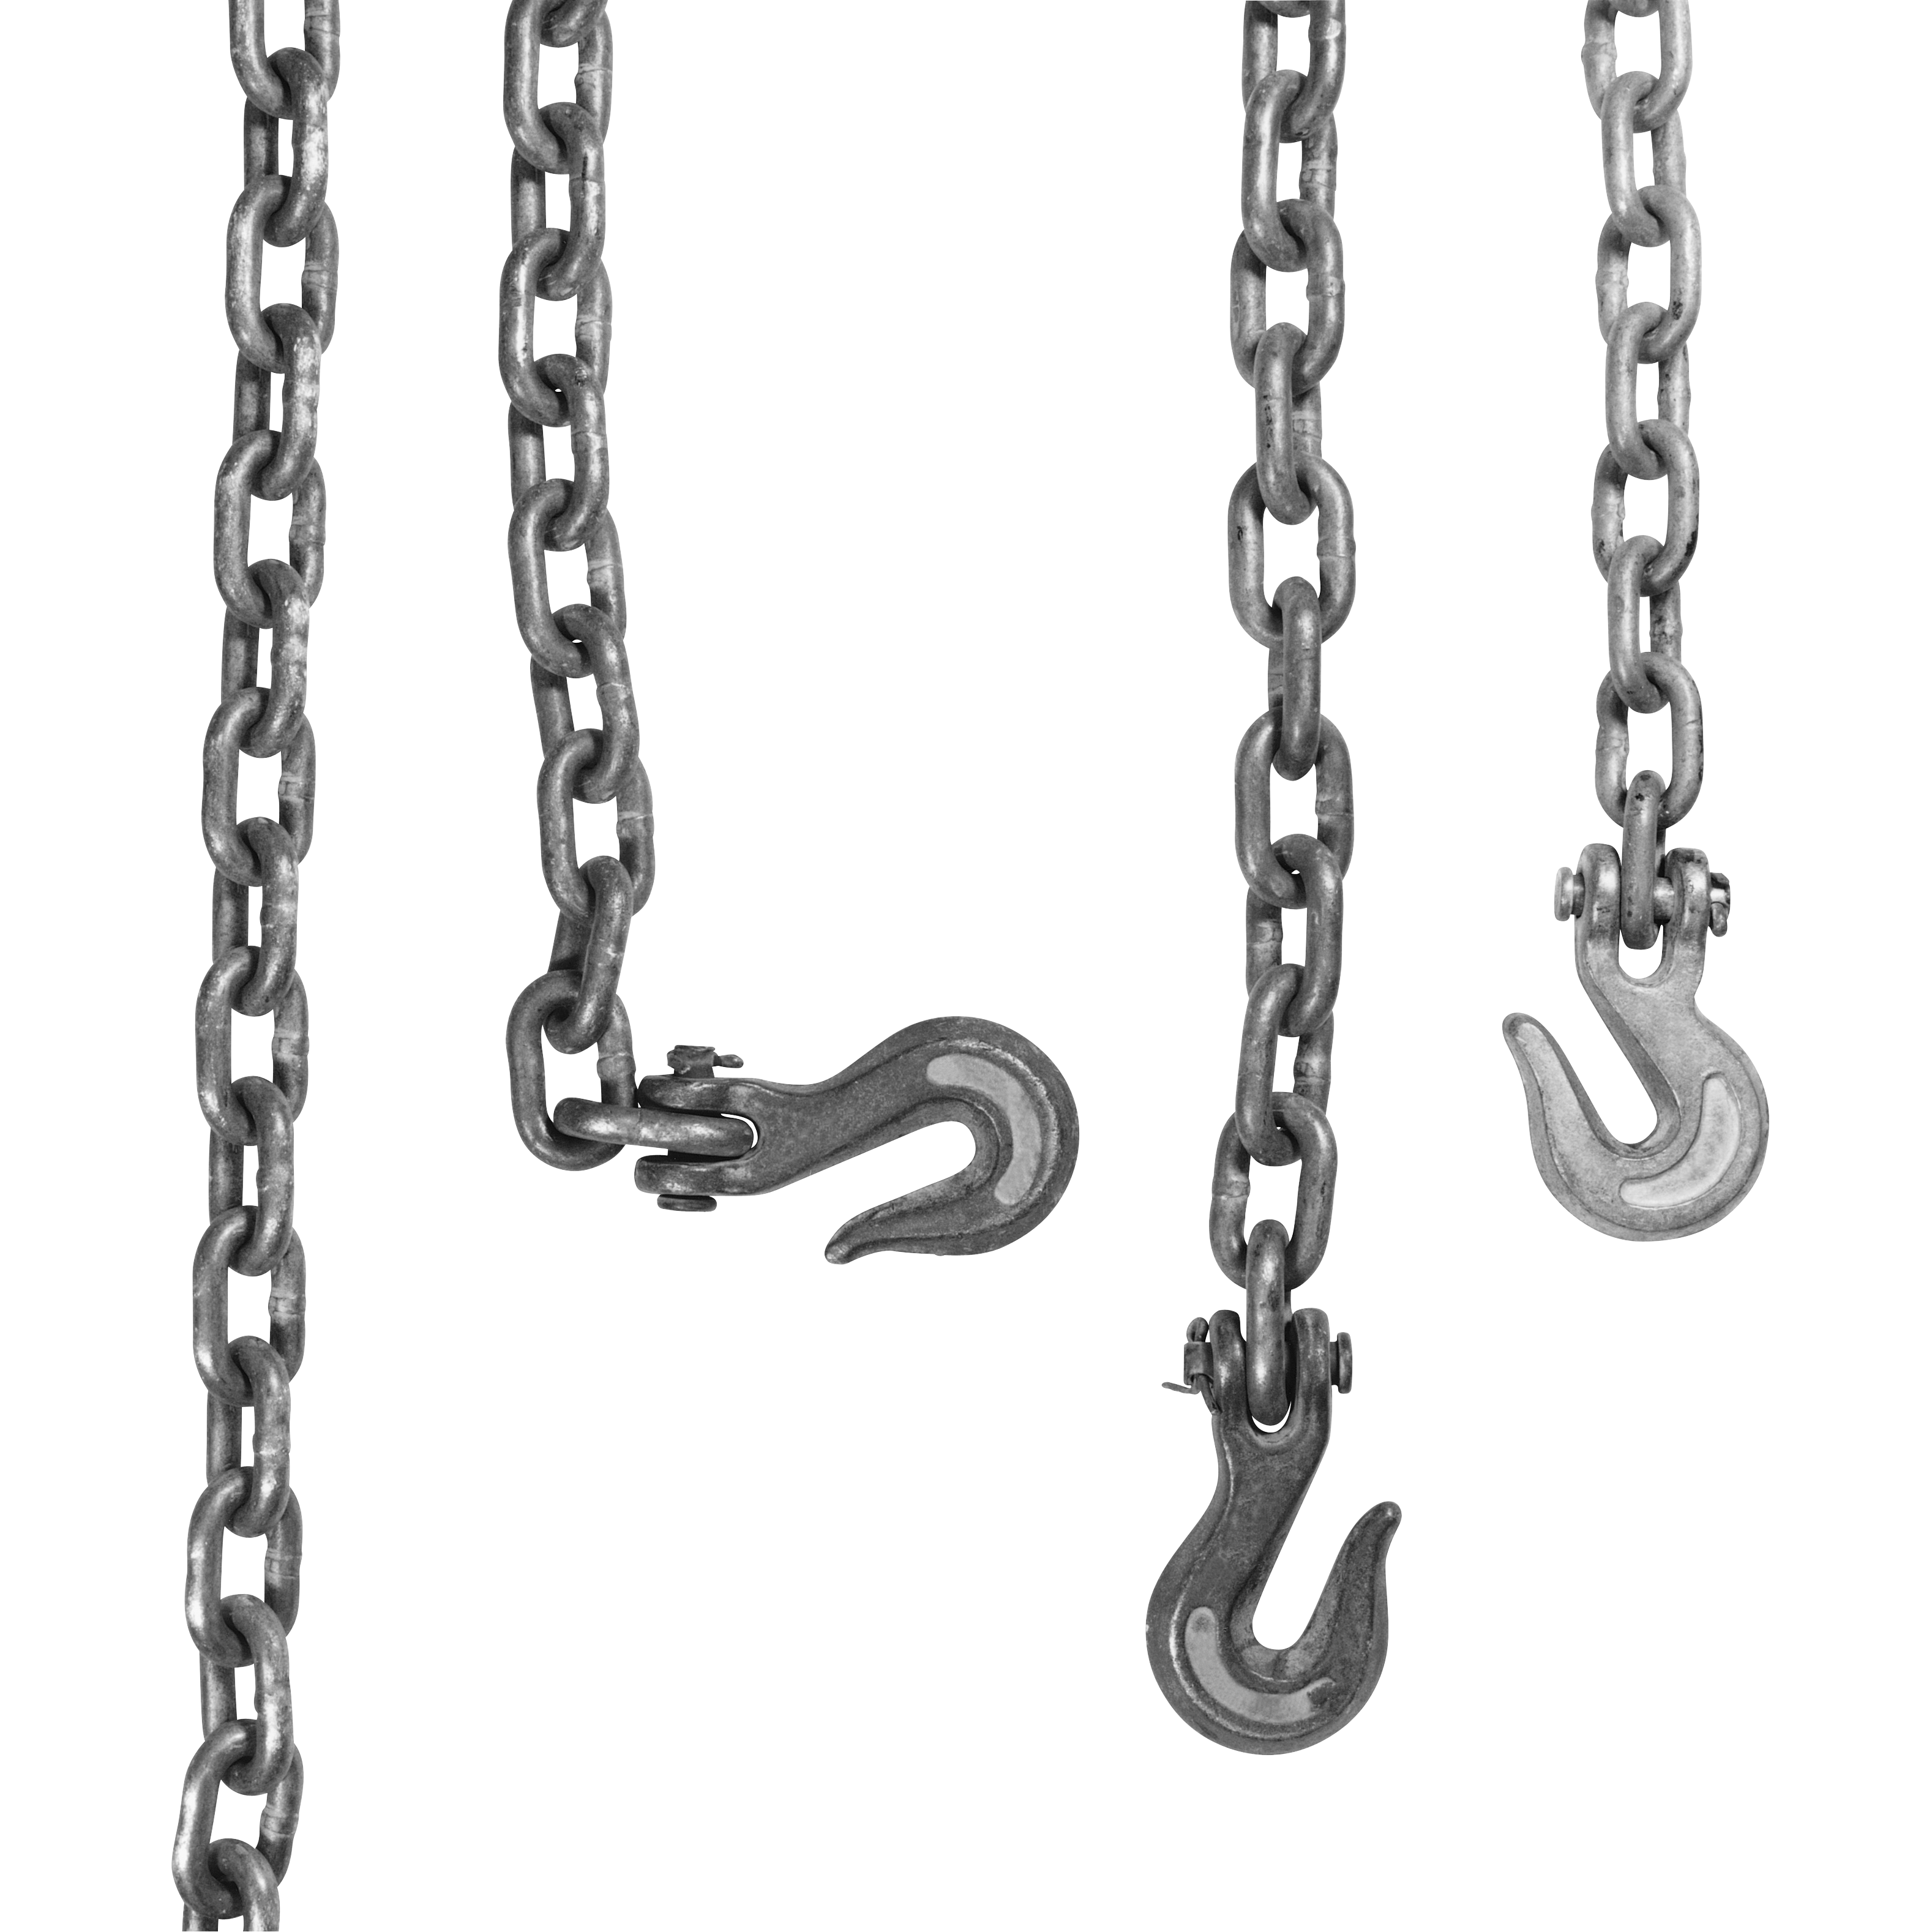 Chain PNG, Chain Transparent Background - FreeIconsPNG